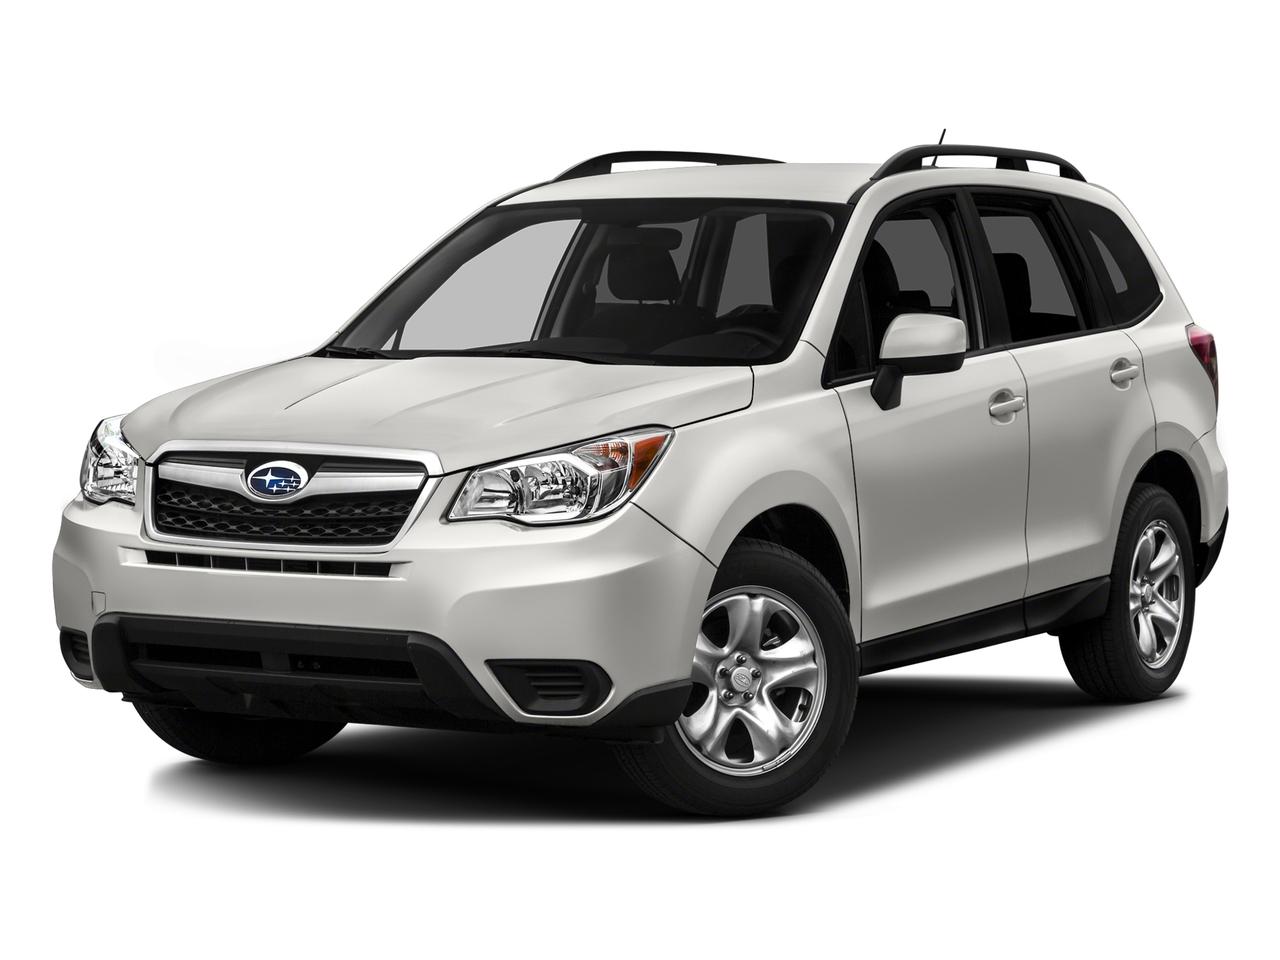 2016 Subaru Forester Vehicle Photo in Allentown, PA 18103